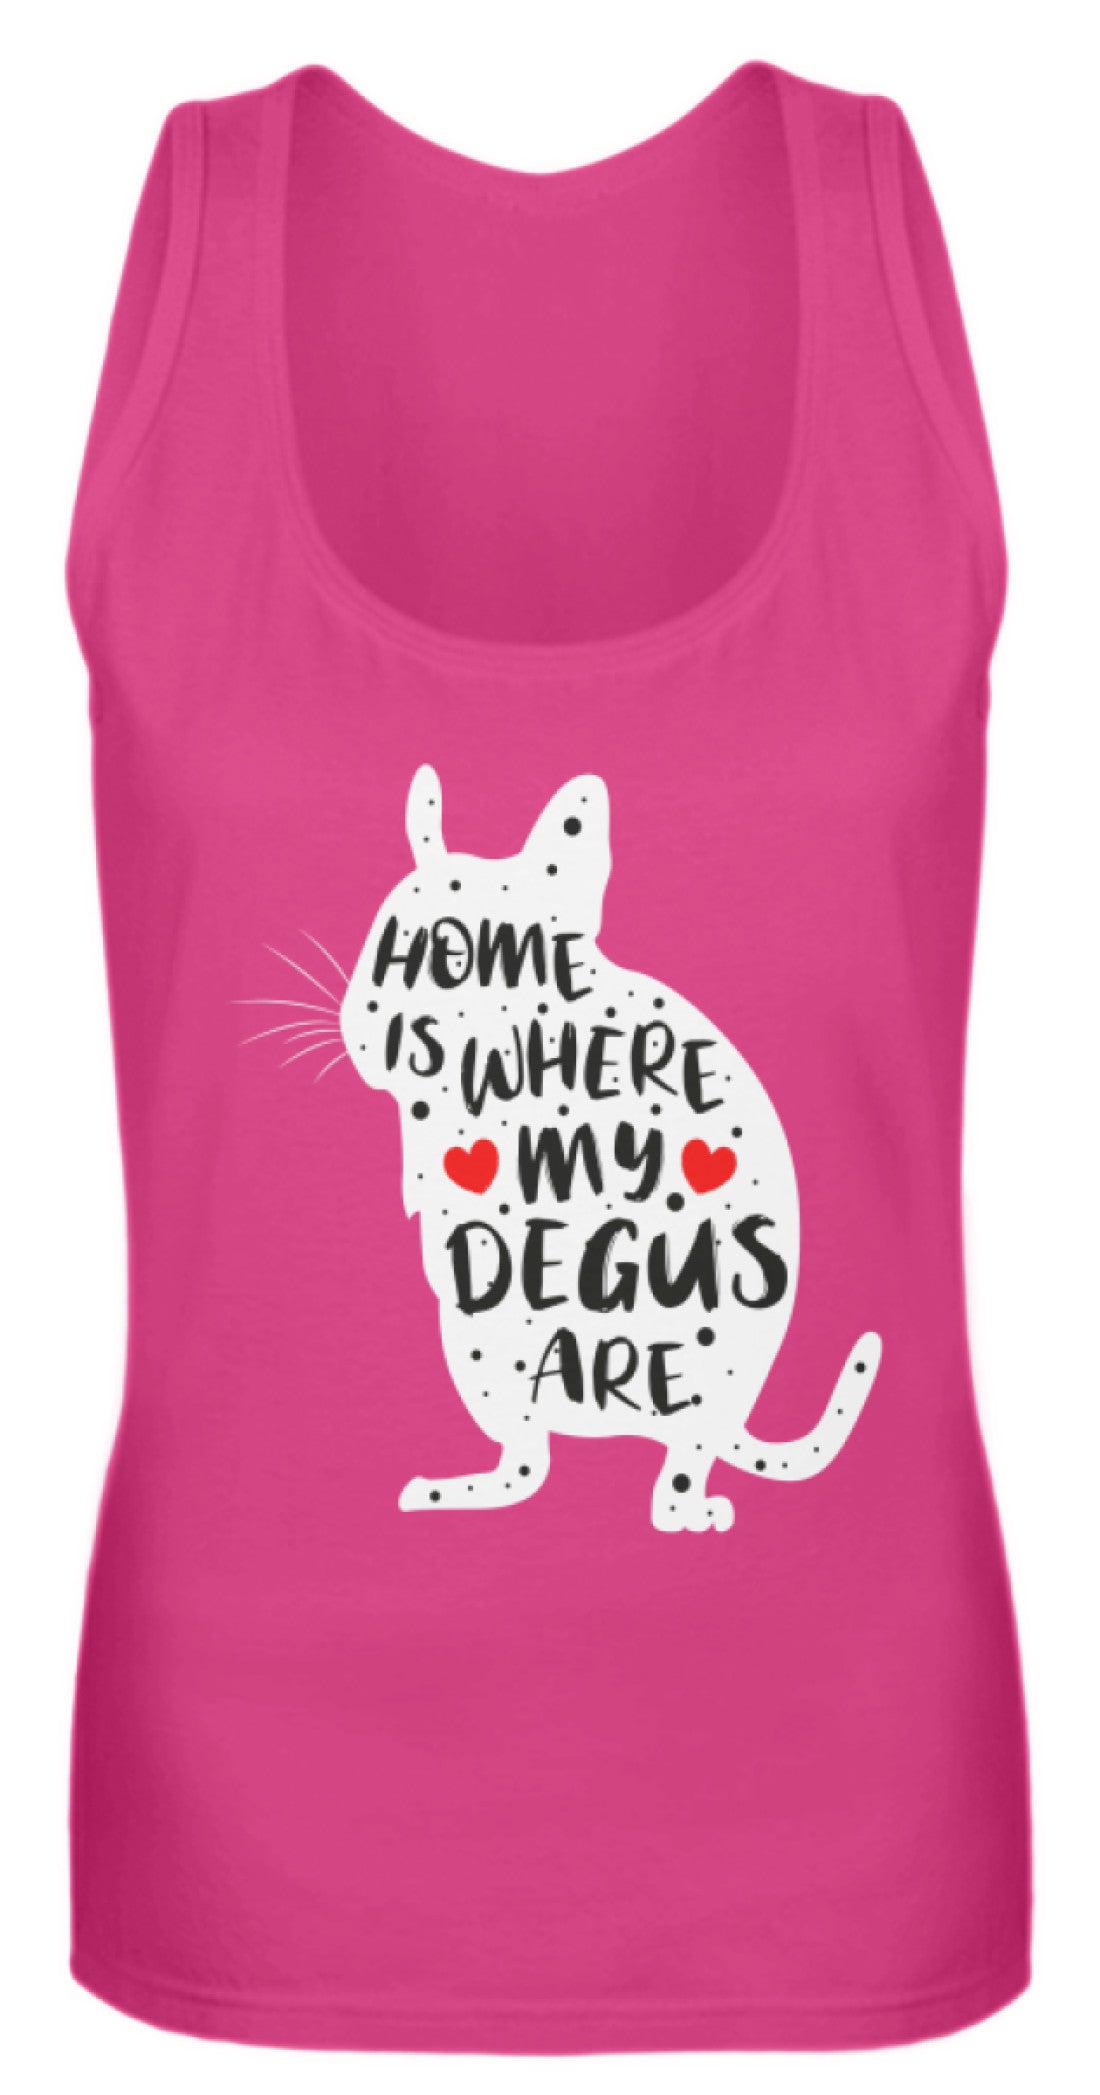 Zeigt funny adorable degu saying rodent frauen tanktop in Farbe Black